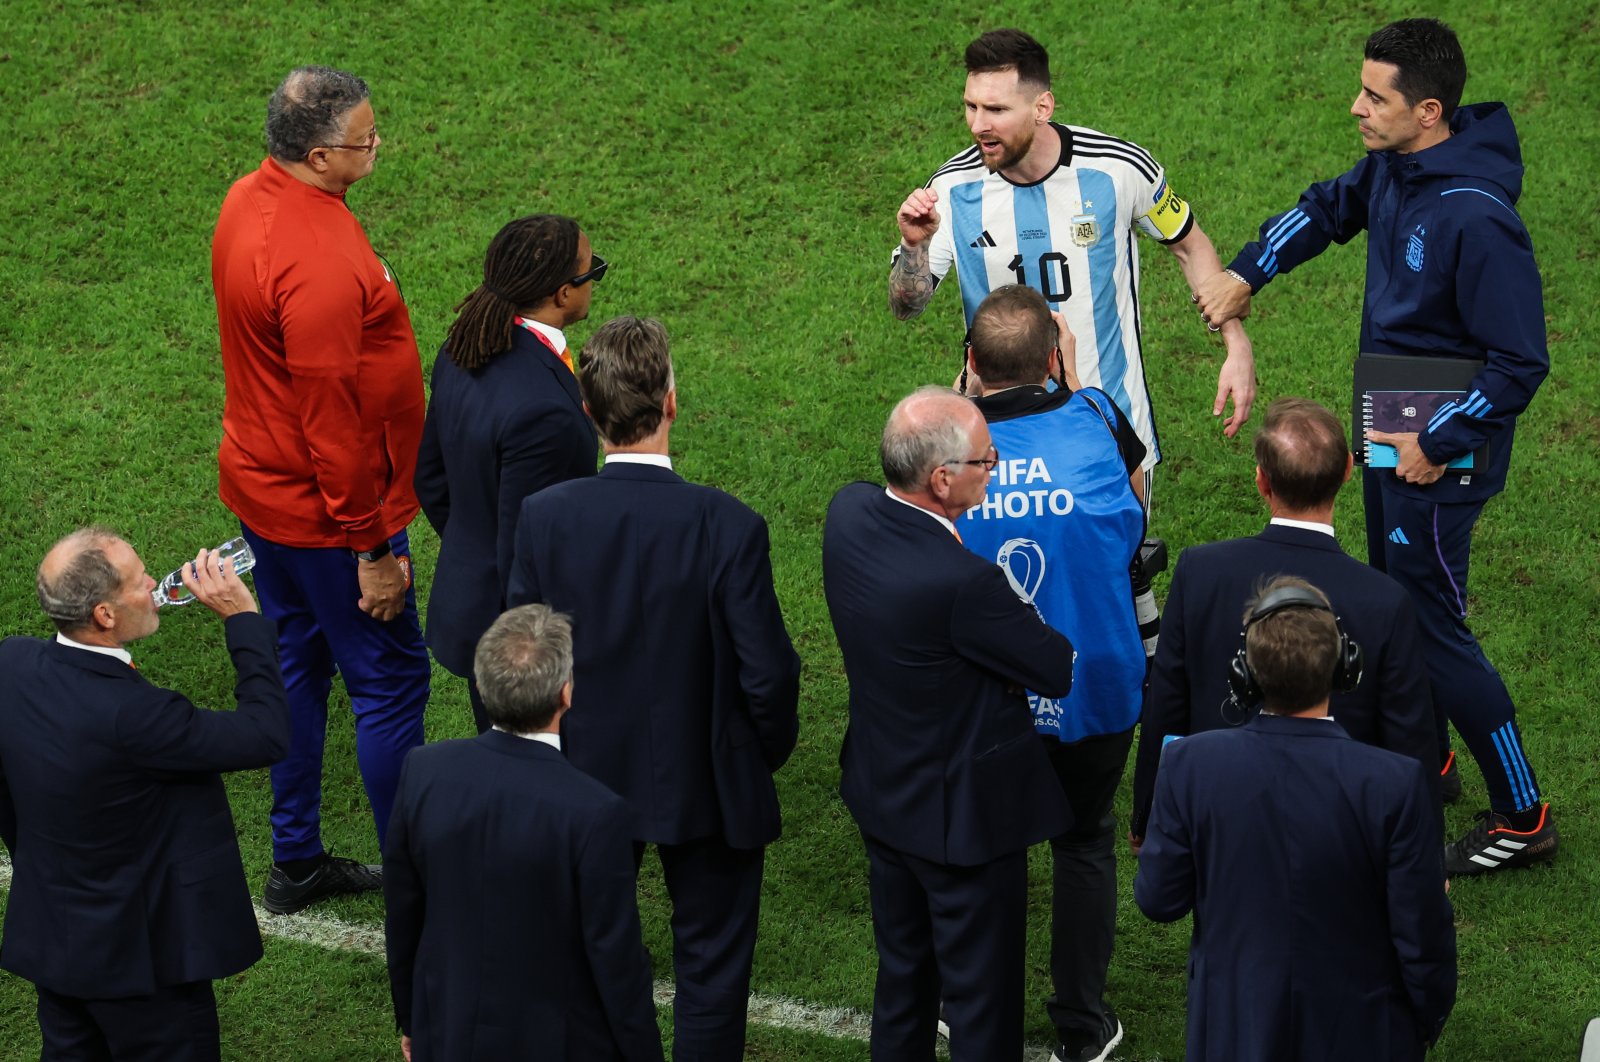 Argentina&#039;s Lionel Messi talks with assistant coach Edgar Davids and head coach Louis van Gaal of Netherlands during the FIFA World Cup Qatar 2022 quarterfinal match between Netherlands and Argentina at Lusail Stadium, Lusail City, Qatar, Dec. 9, 2022. (Getty Images Photo)